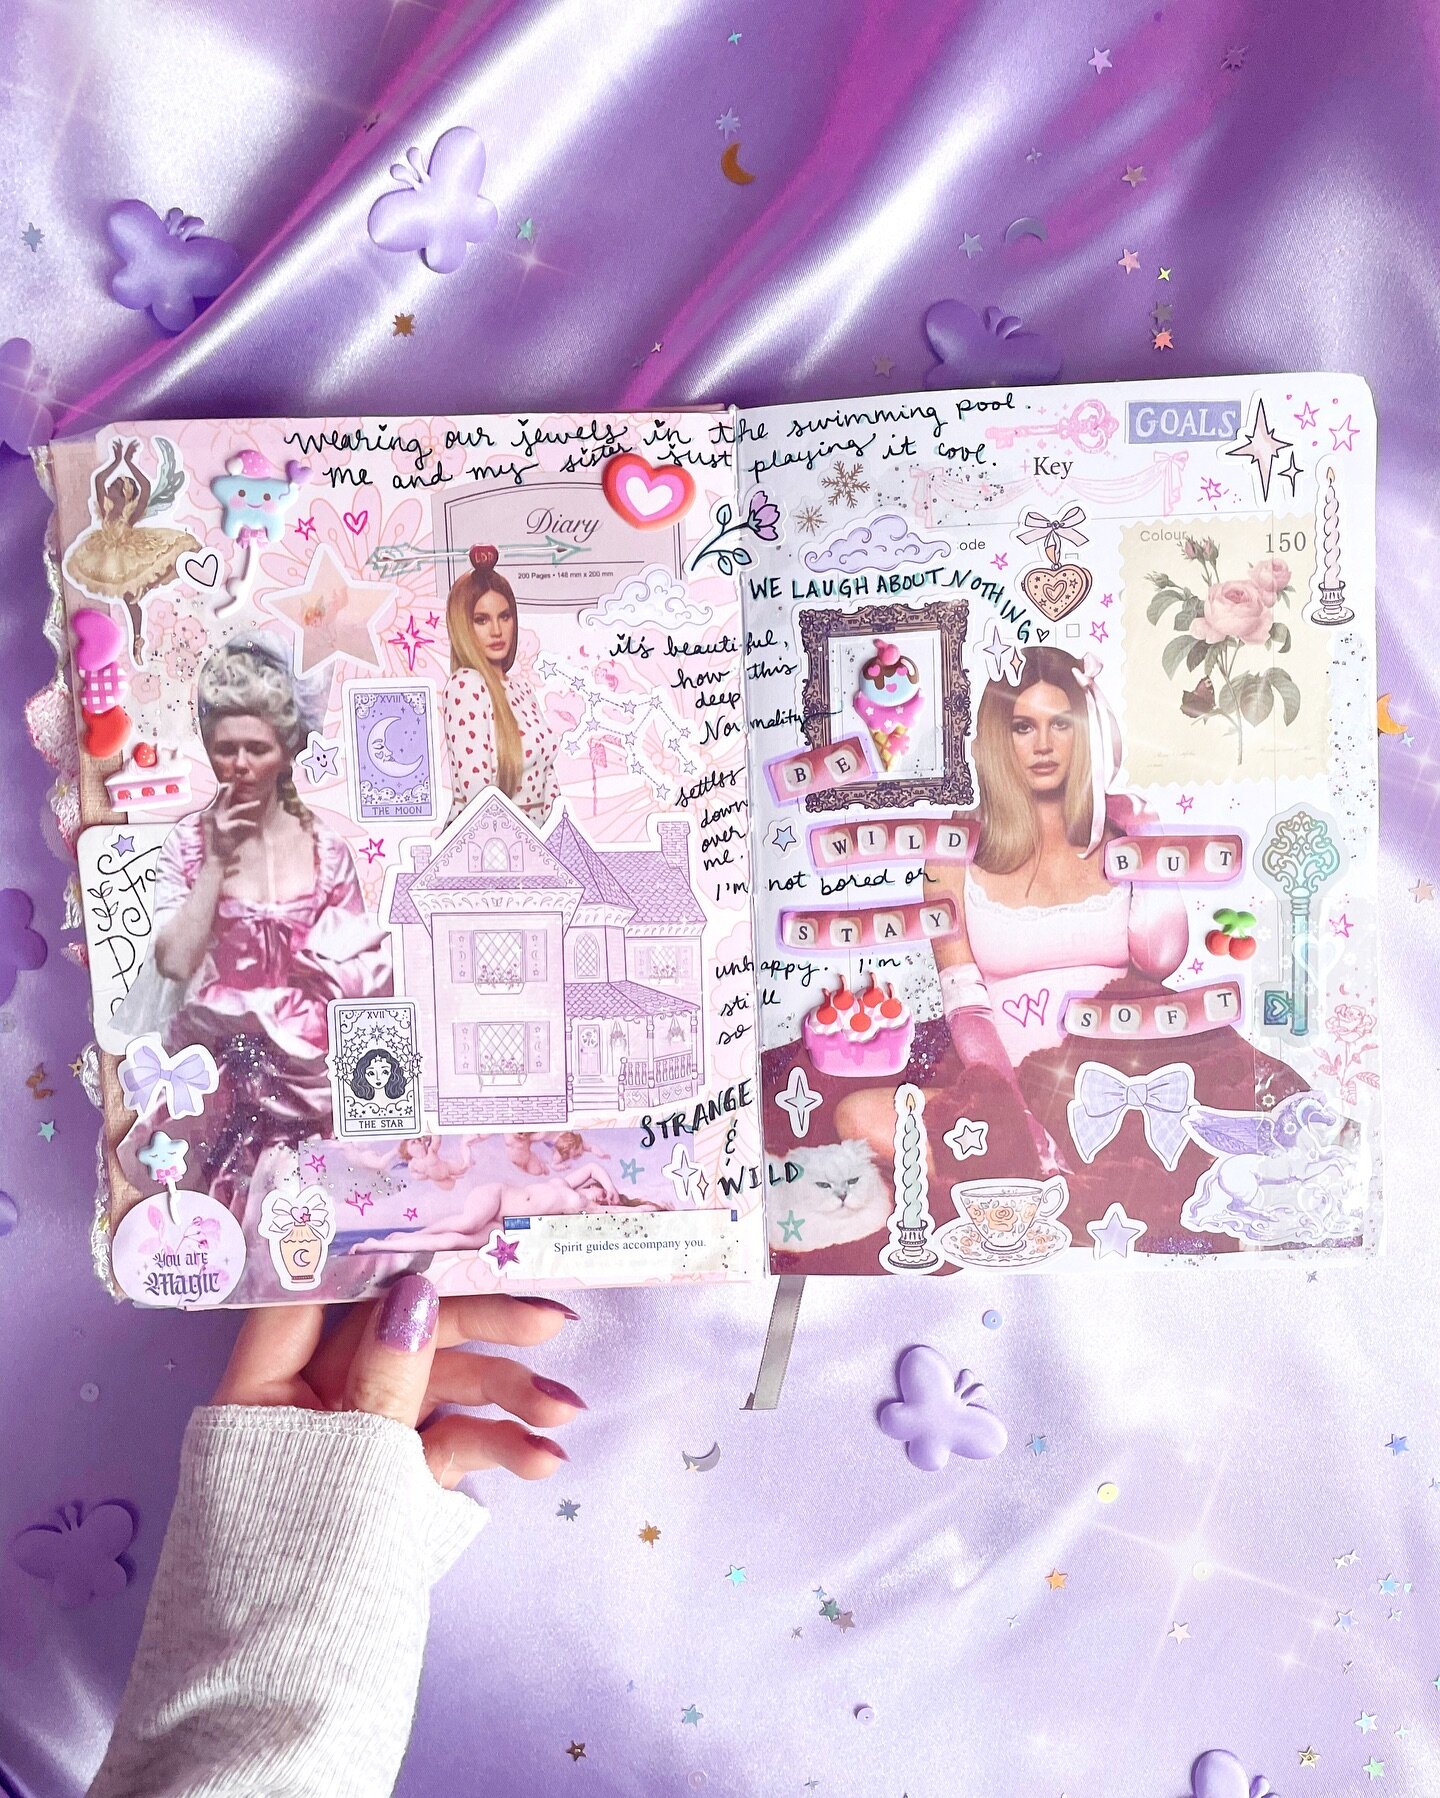 a little artsy collage to break in my new journal. ♡ 

stickers: mostly from Lace &amp; Whimsy; ballerinas are by @stickiiclub; puffy stickers are from amaz0n
stamps: @notebook_therapy 
lyrics: @honeymoon :)